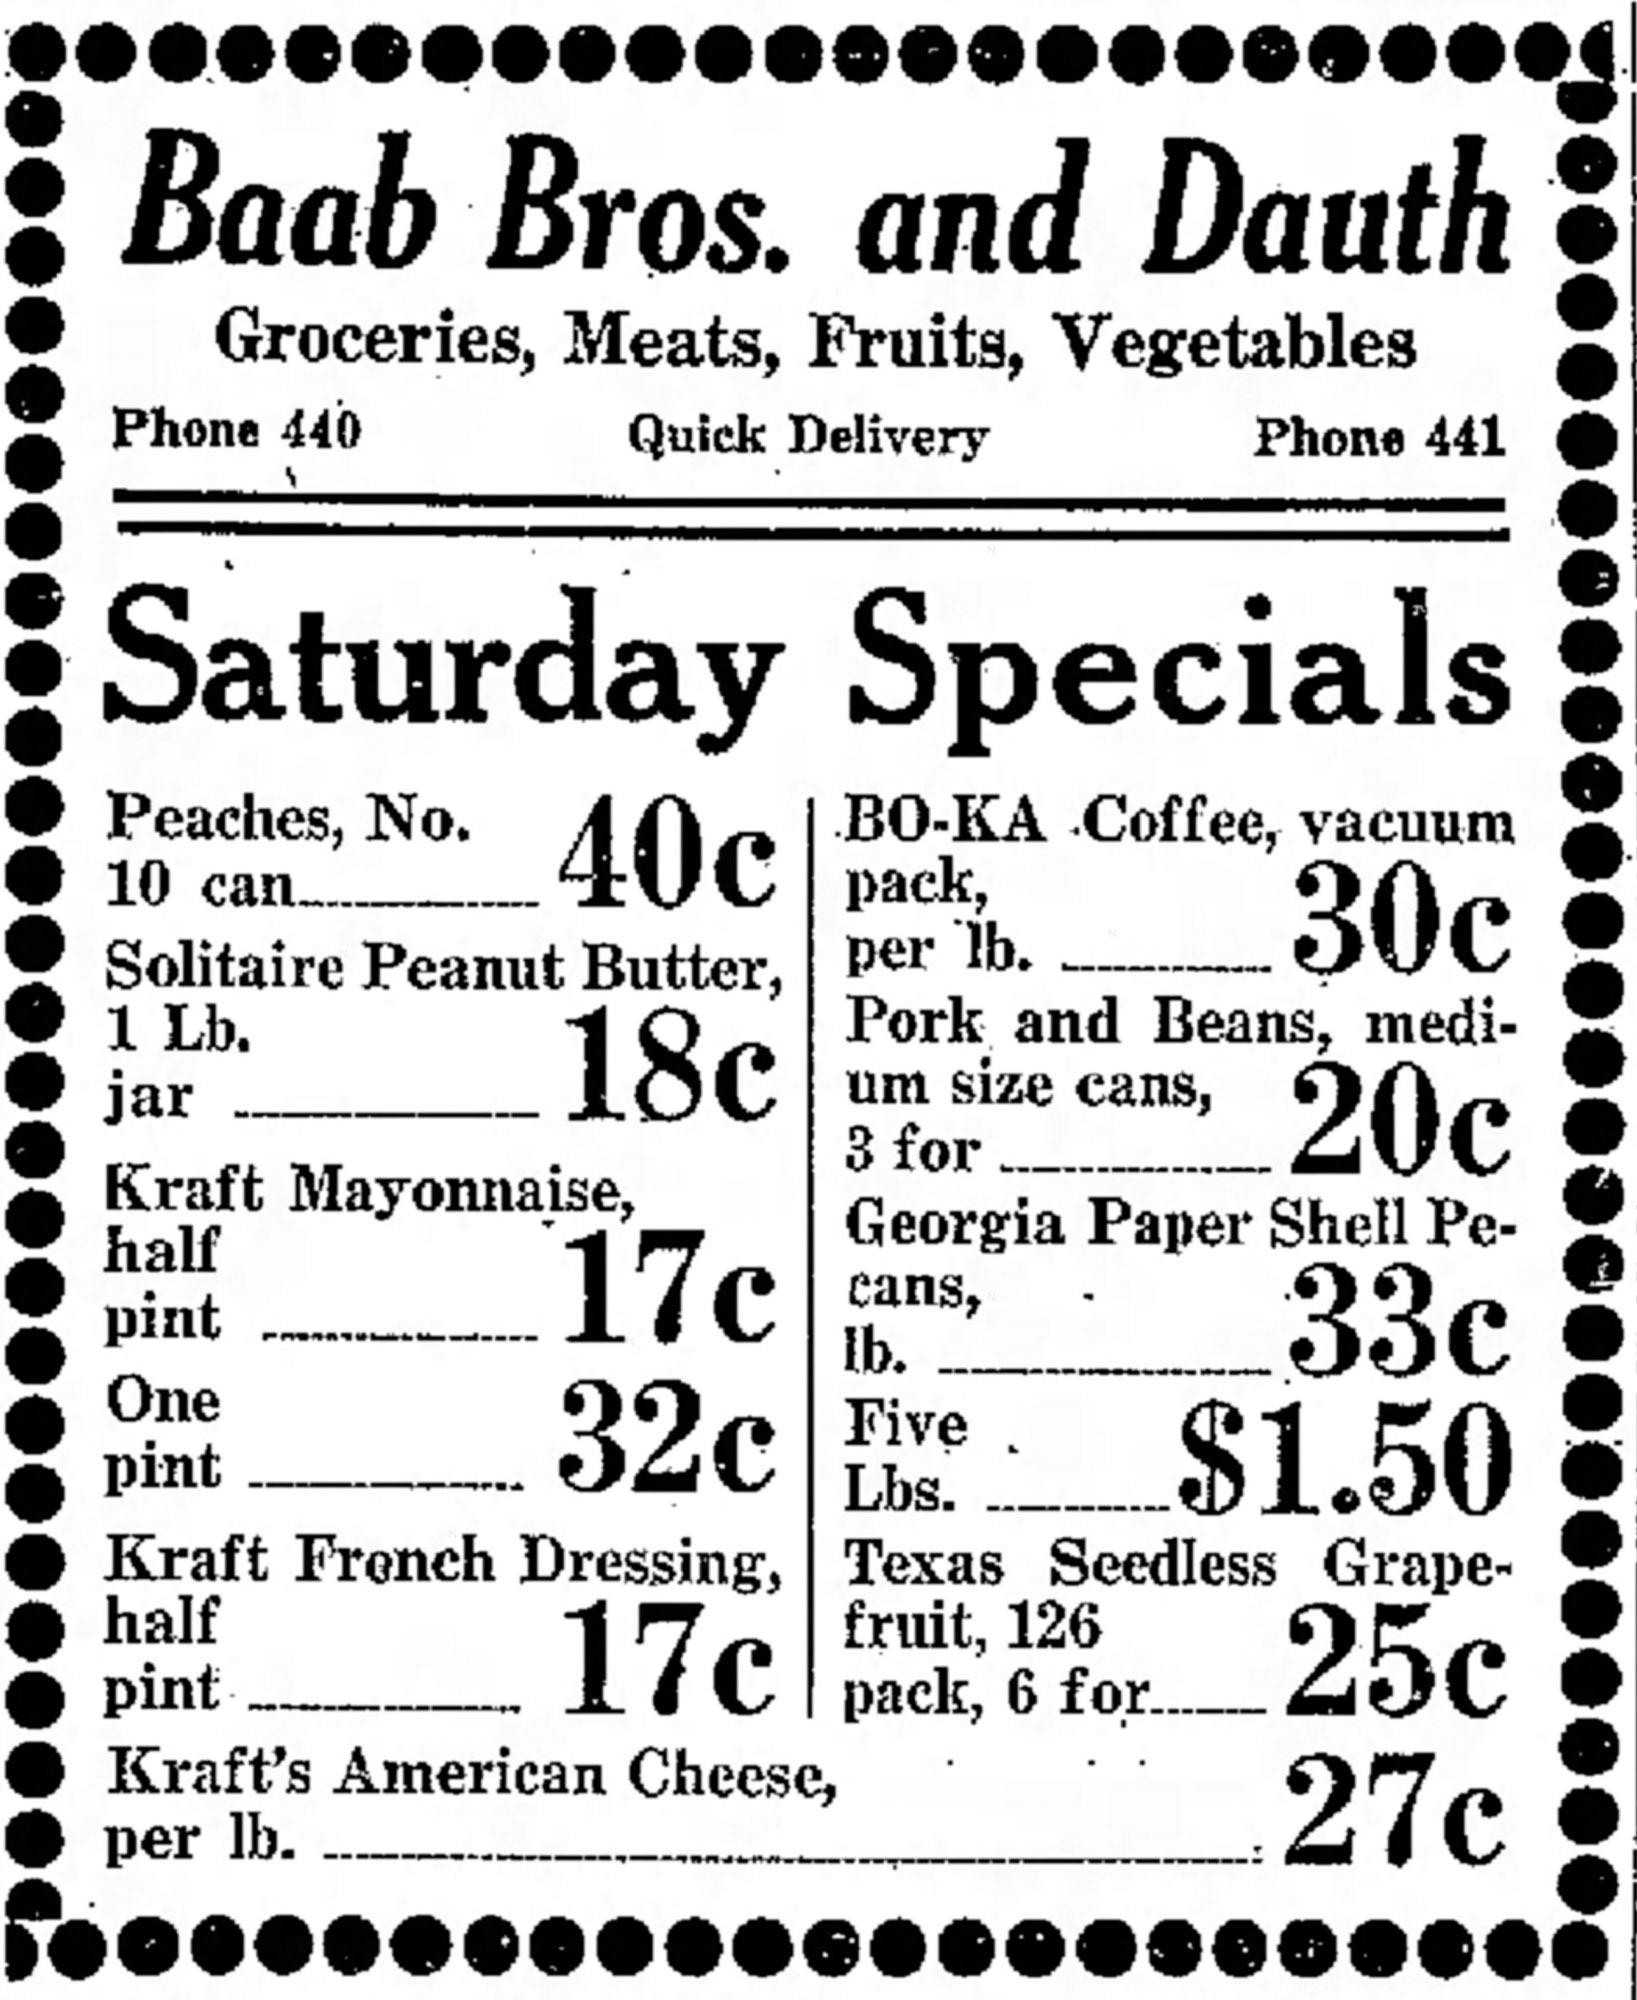 Dauth Family Archive - 1931-12-04 - Greeley Daily Tribune - Baab Bros and Dauth Advertisement